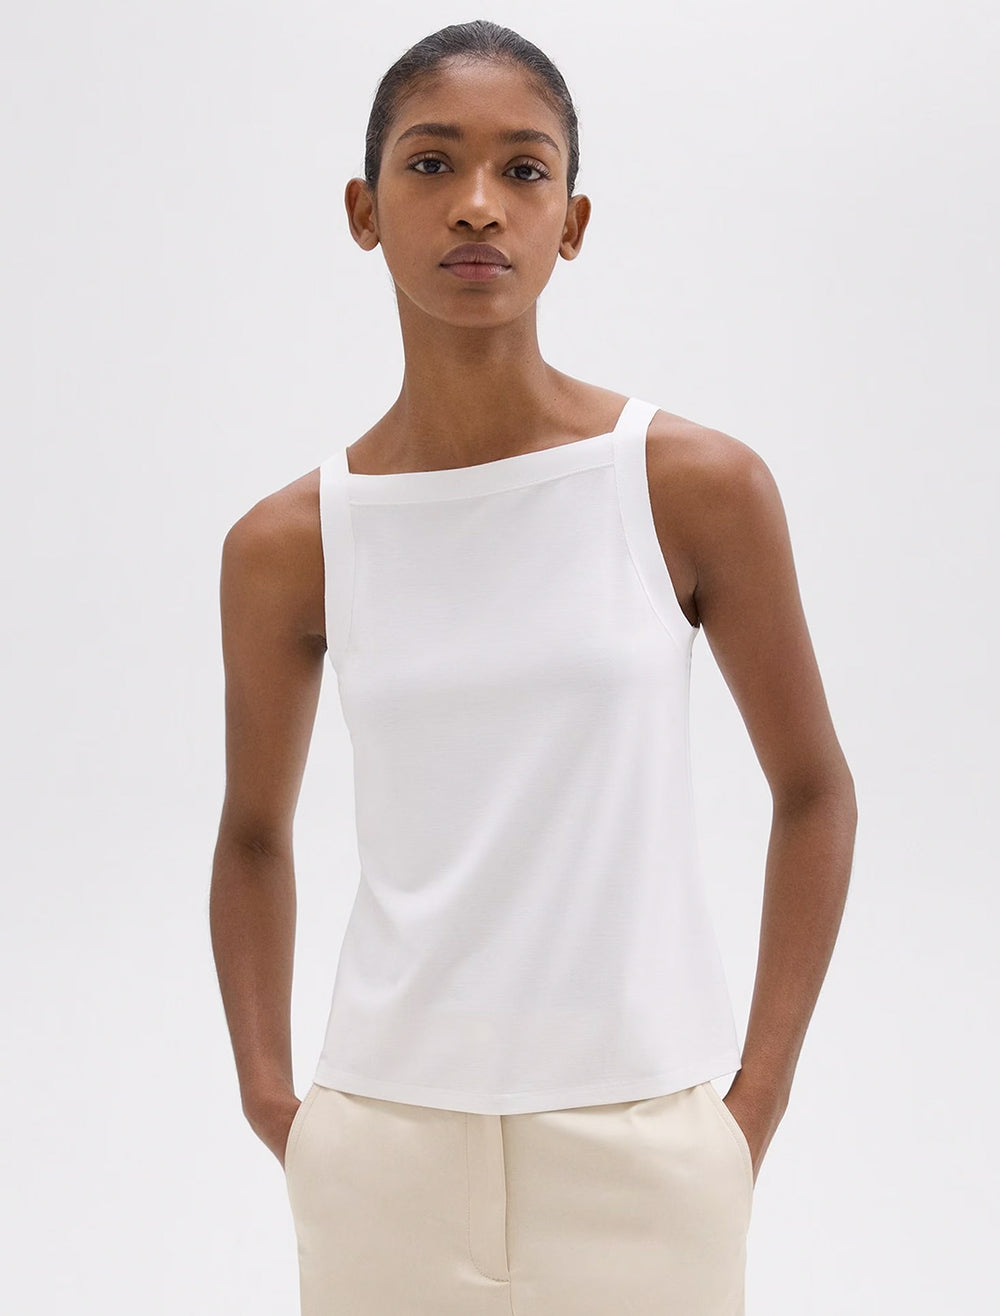 Model wearing Theory's square high neck tank in white.